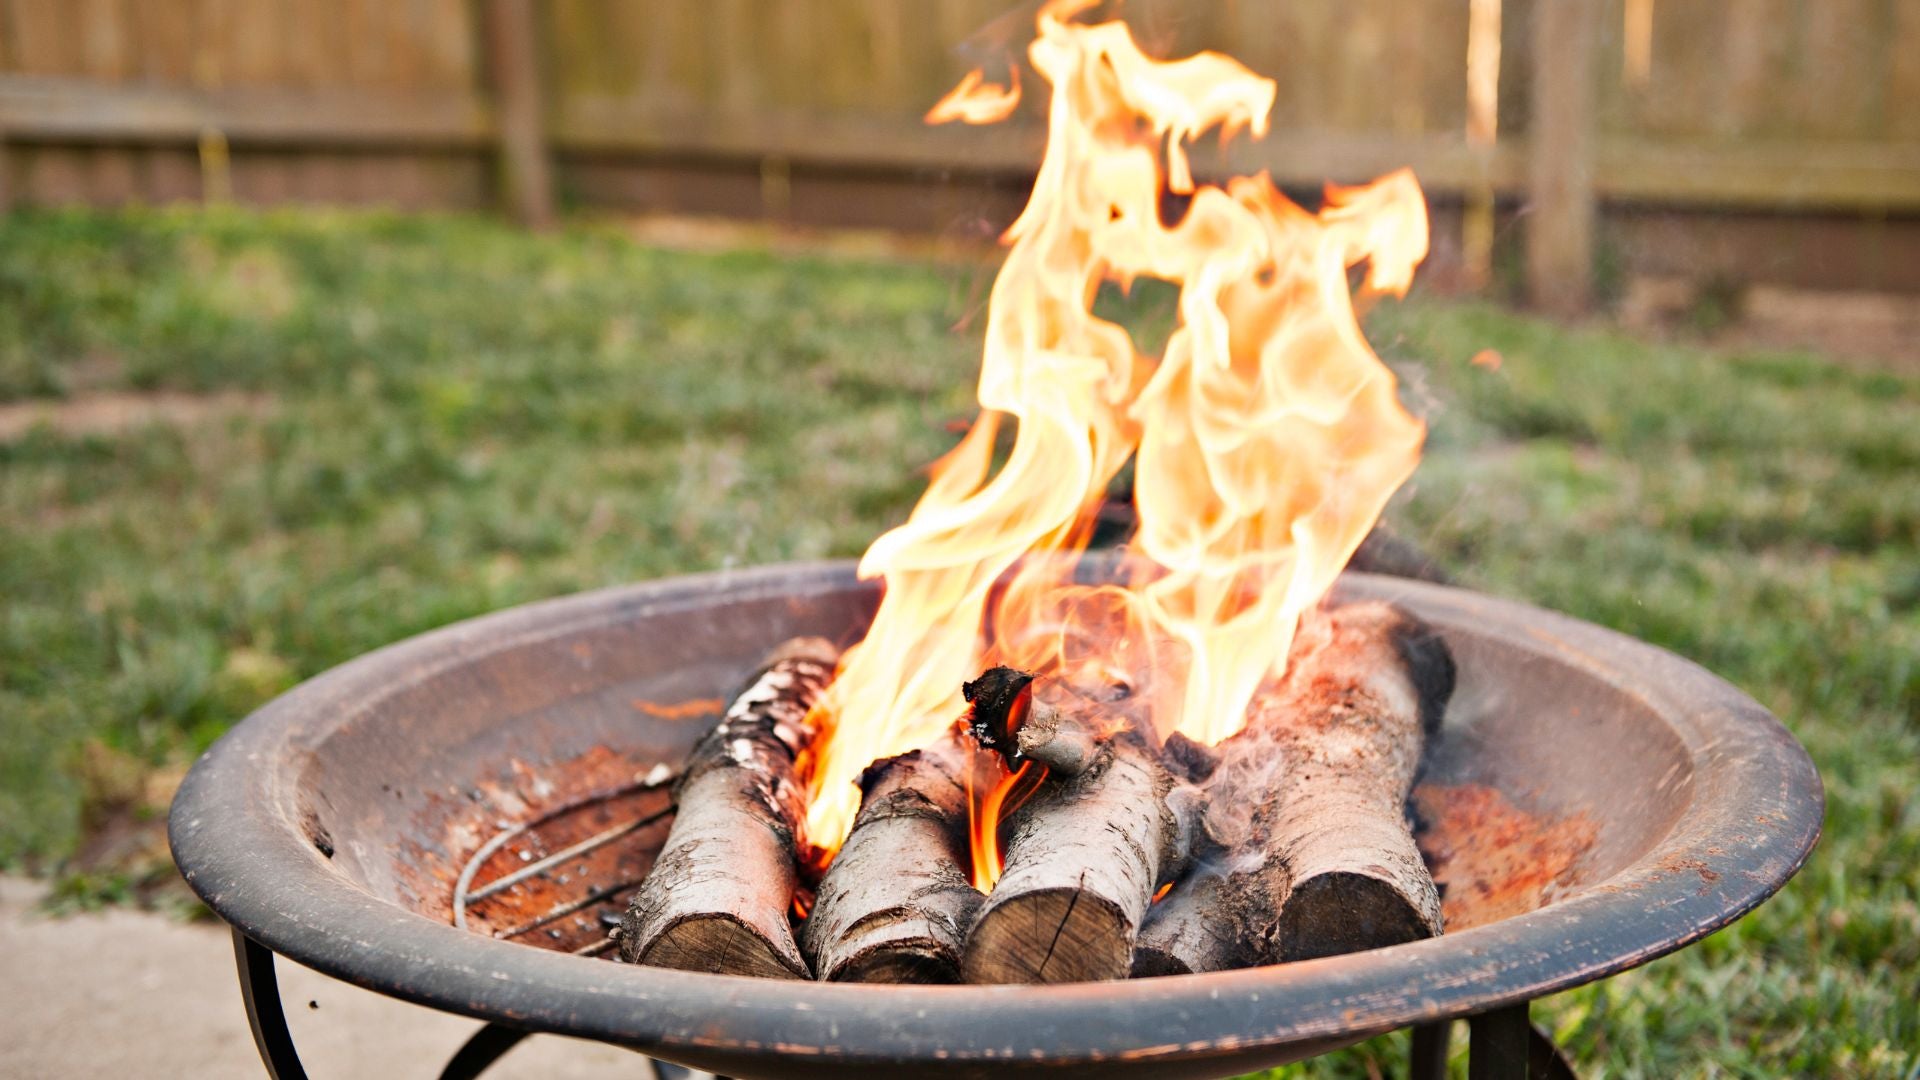 Where Is The Best Location For An Outdoor Fire Pit?